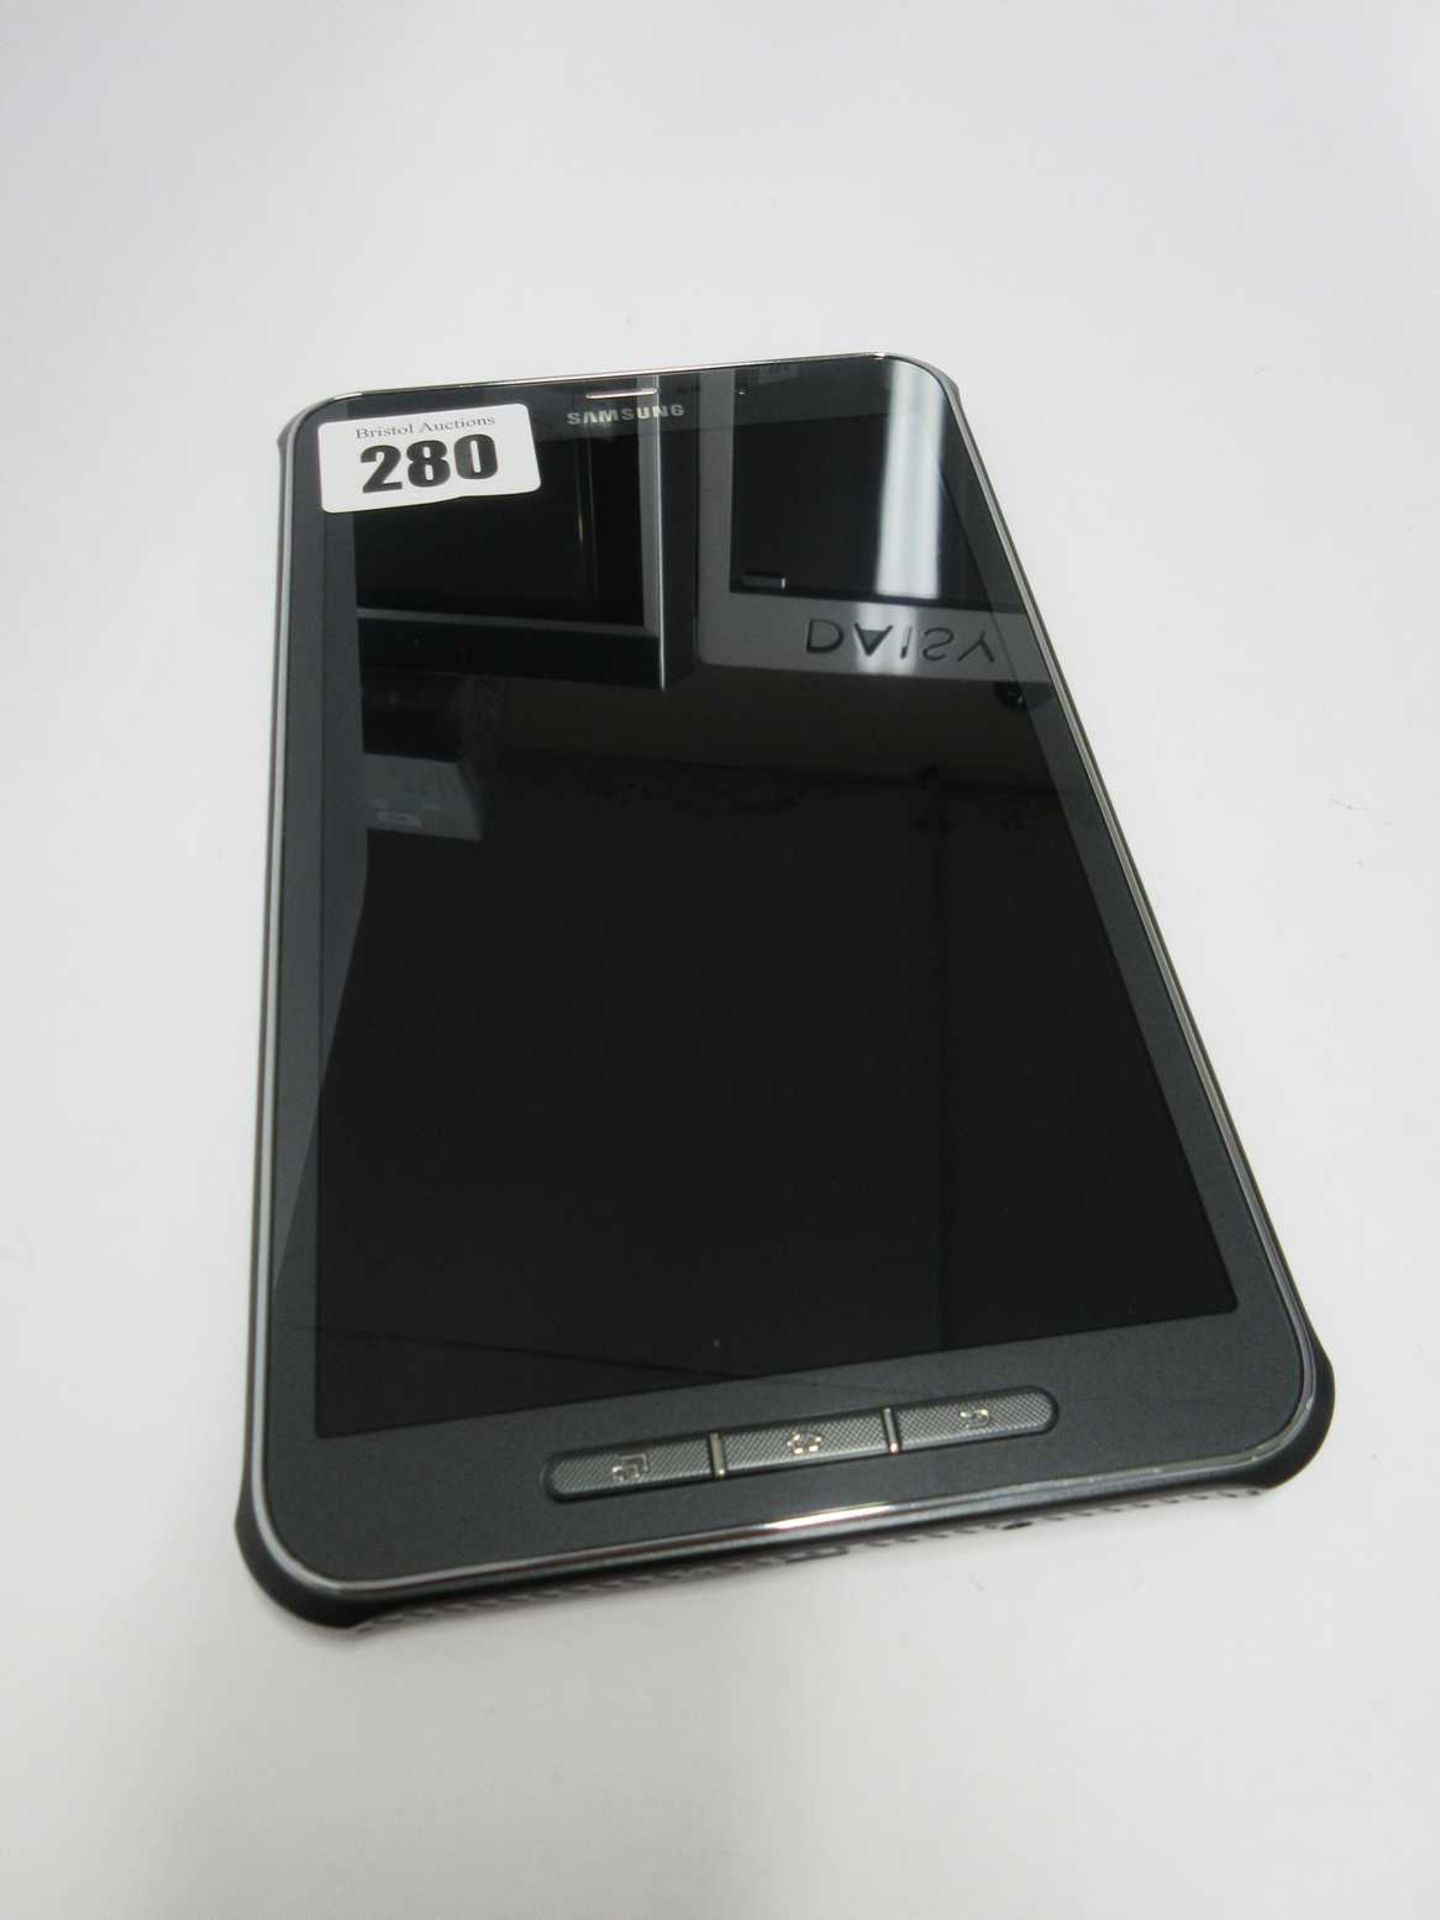 A pre-owned Samsung Galaxy Tab Active SM-T365 8" 16GB in Titanium Green (FRP clear) (IMEI: